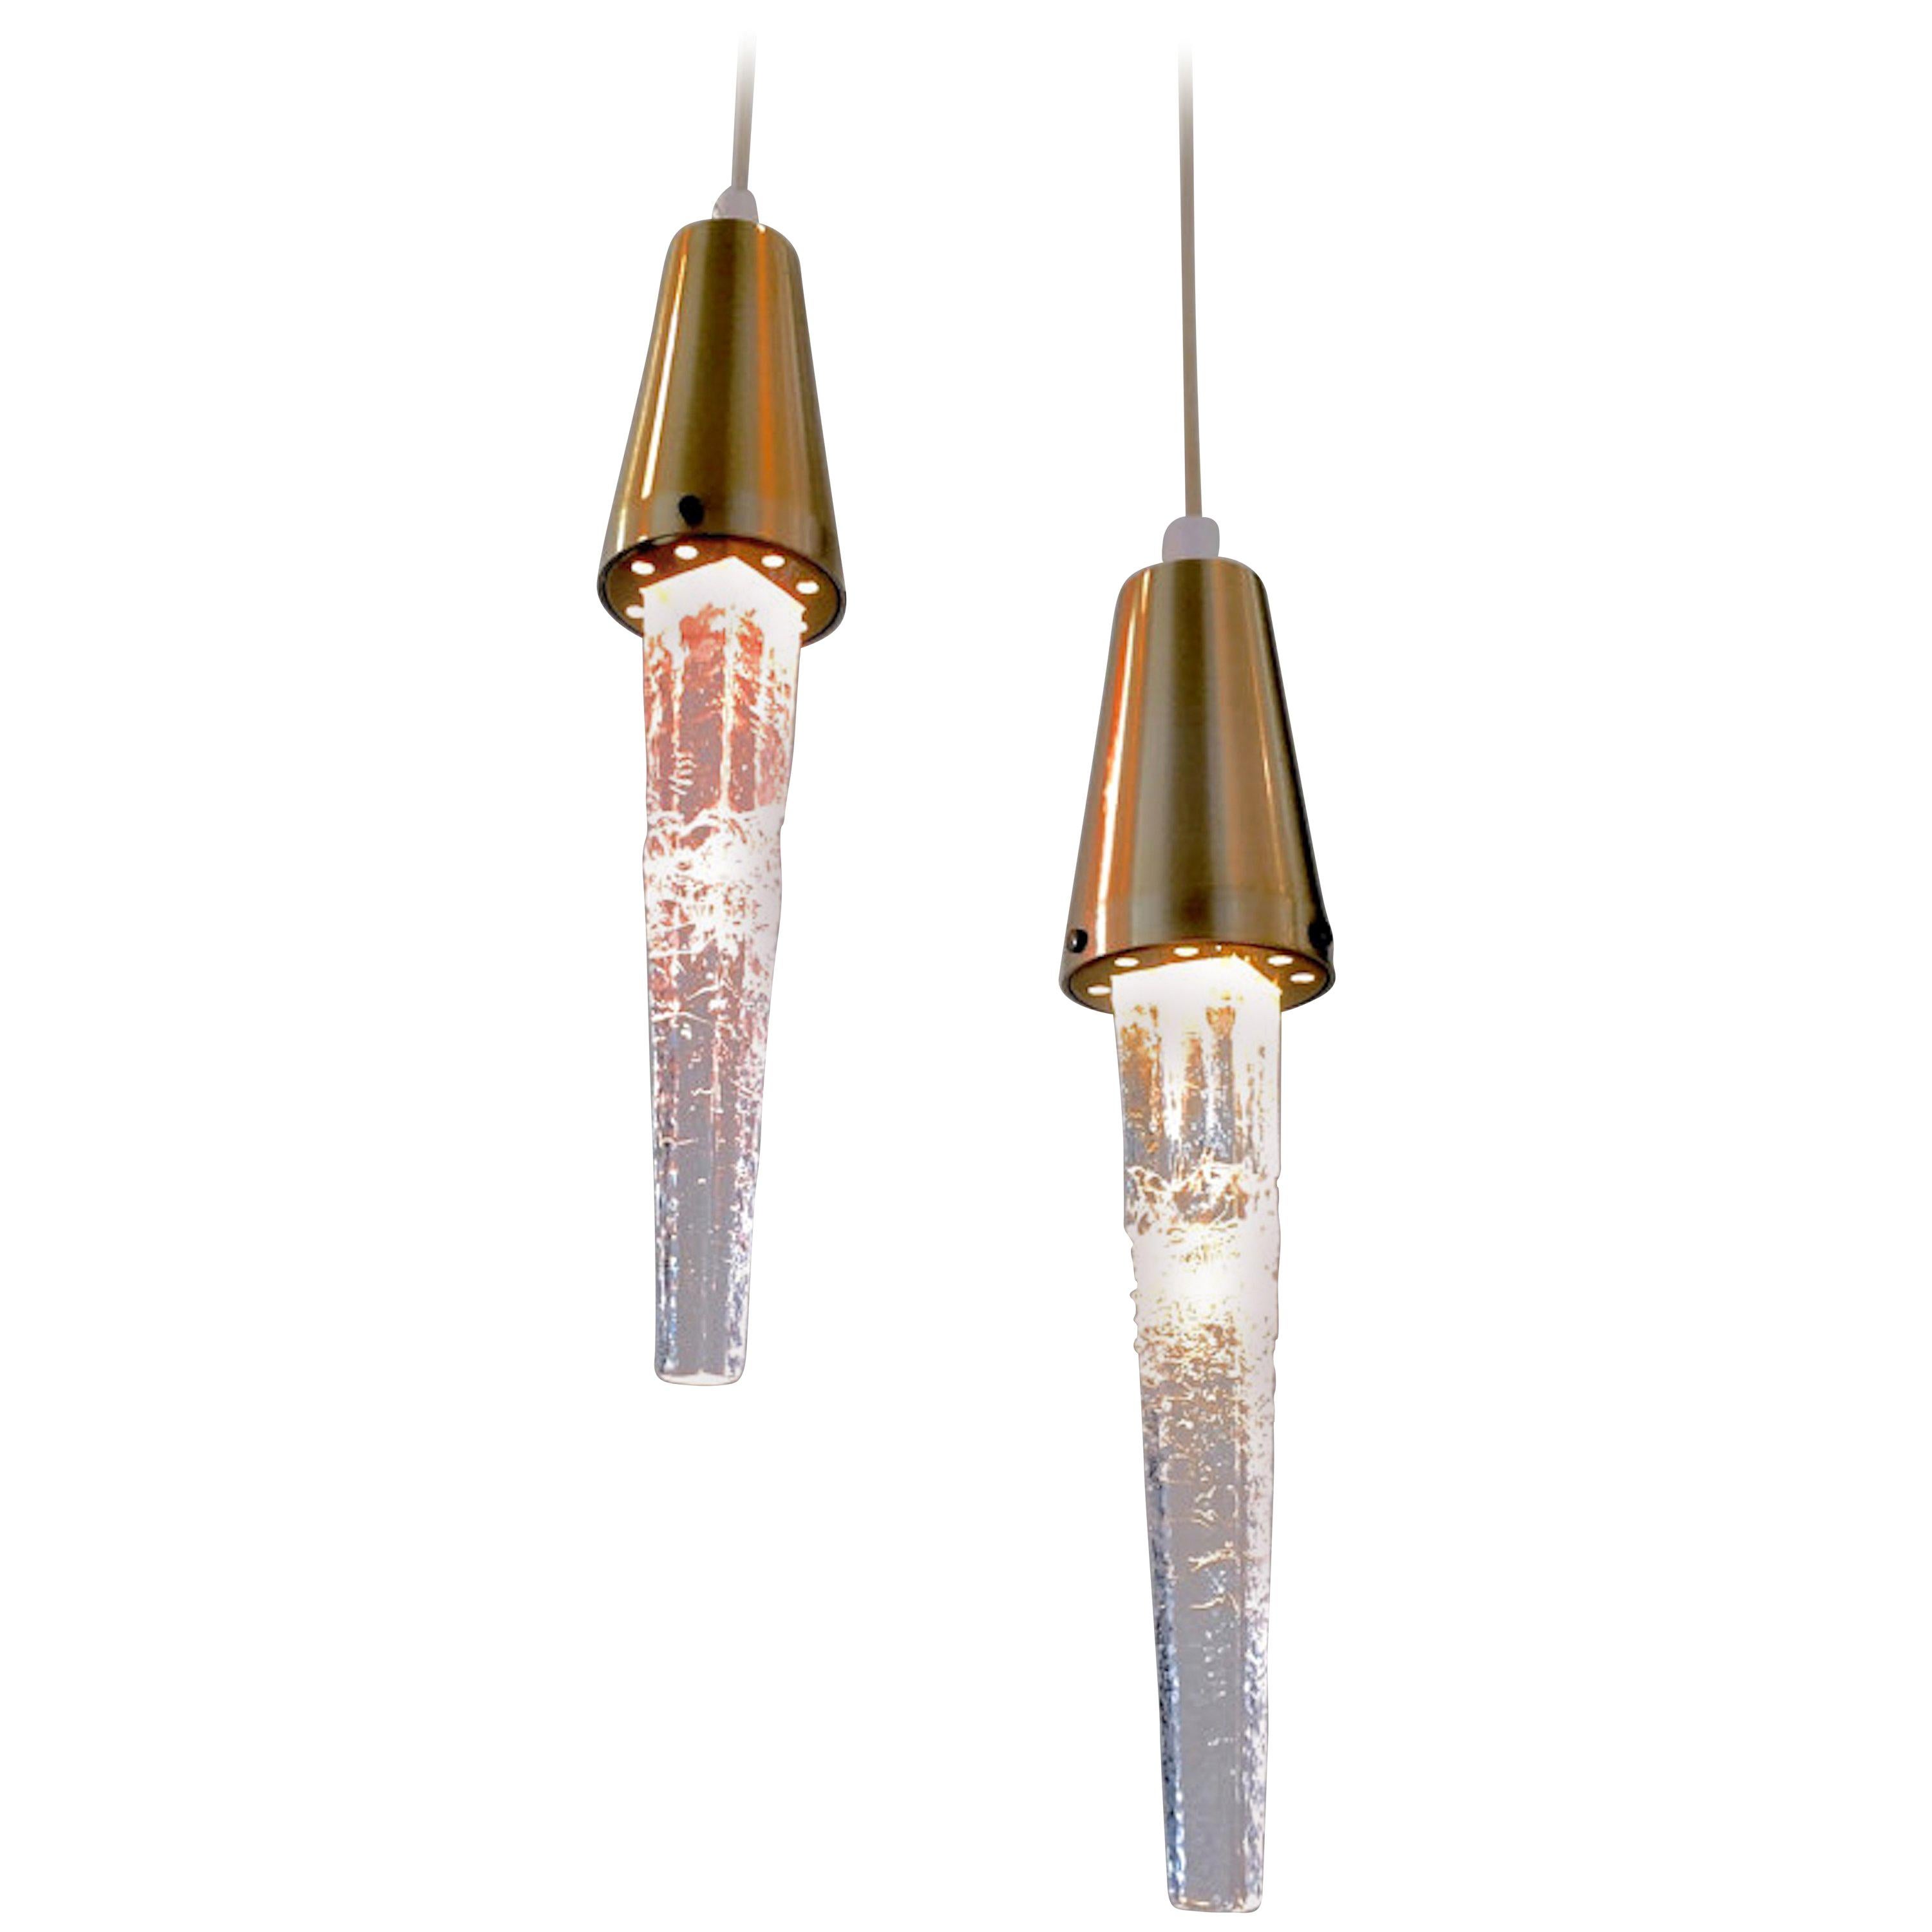 Pair of Swedish Modern Icicle Crystal Pendant Lamps from Ateljé Engberg